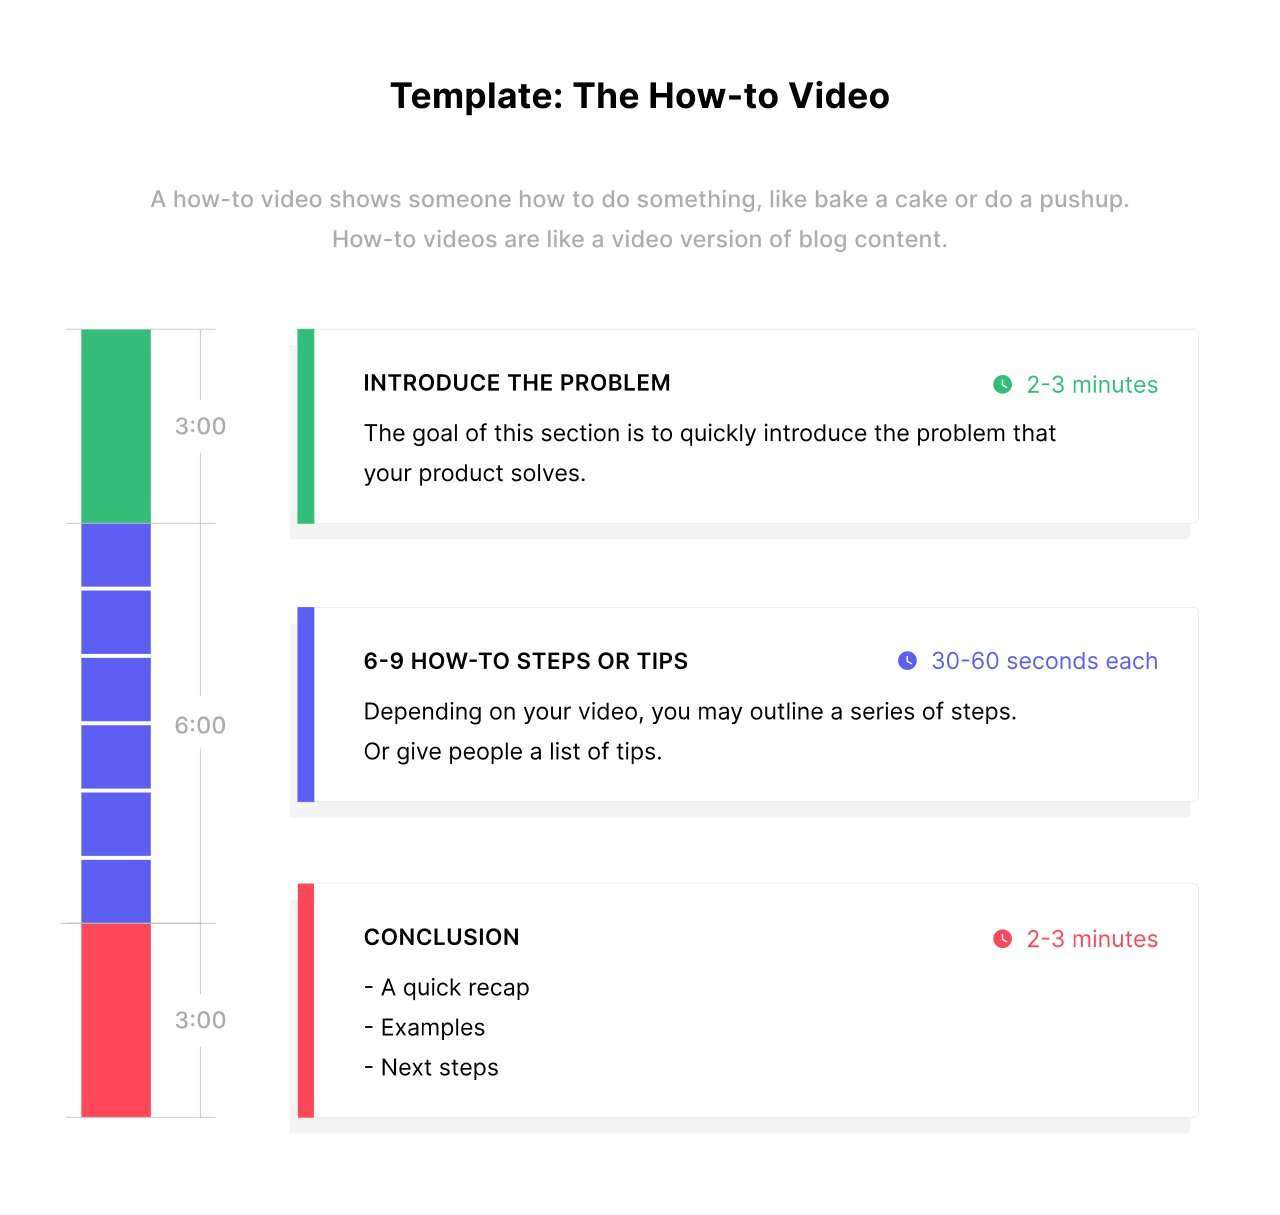 Template #1: The How-to Video